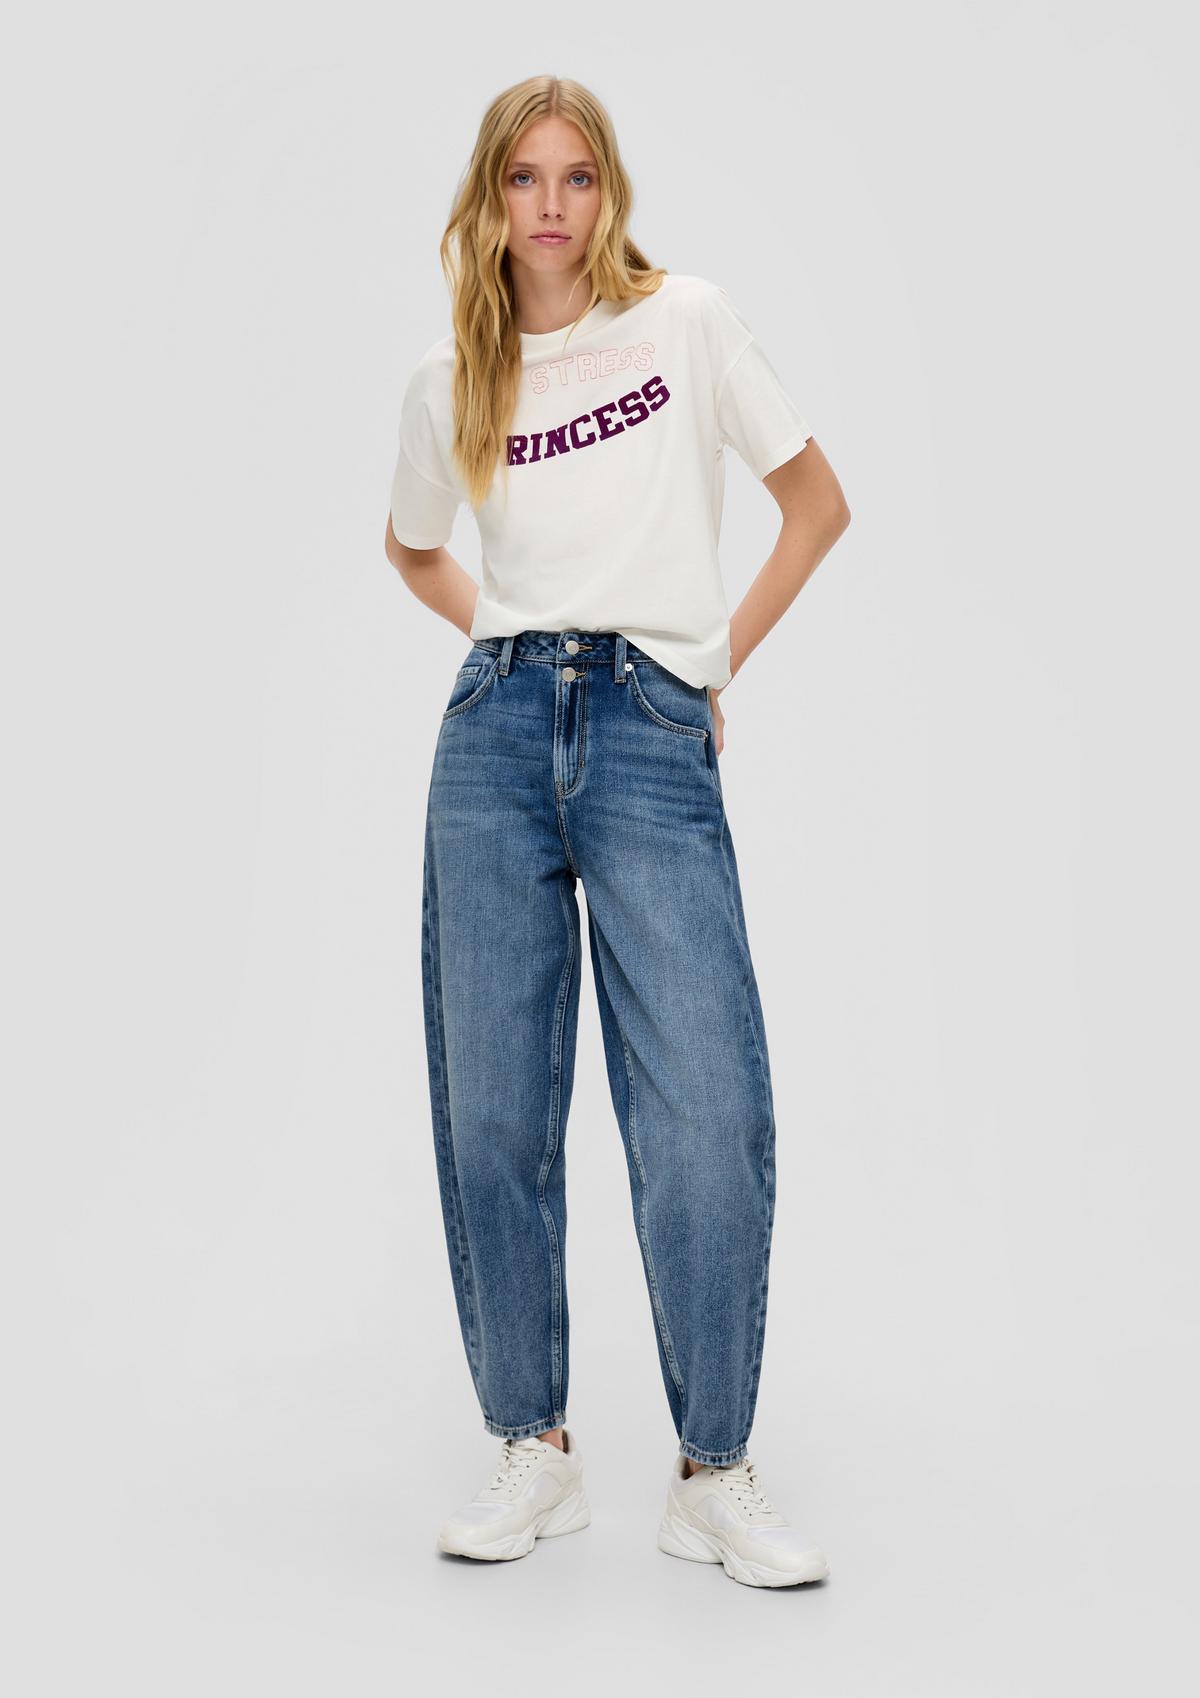 Mom jeans / relaxed fit / high rise / tapered leg